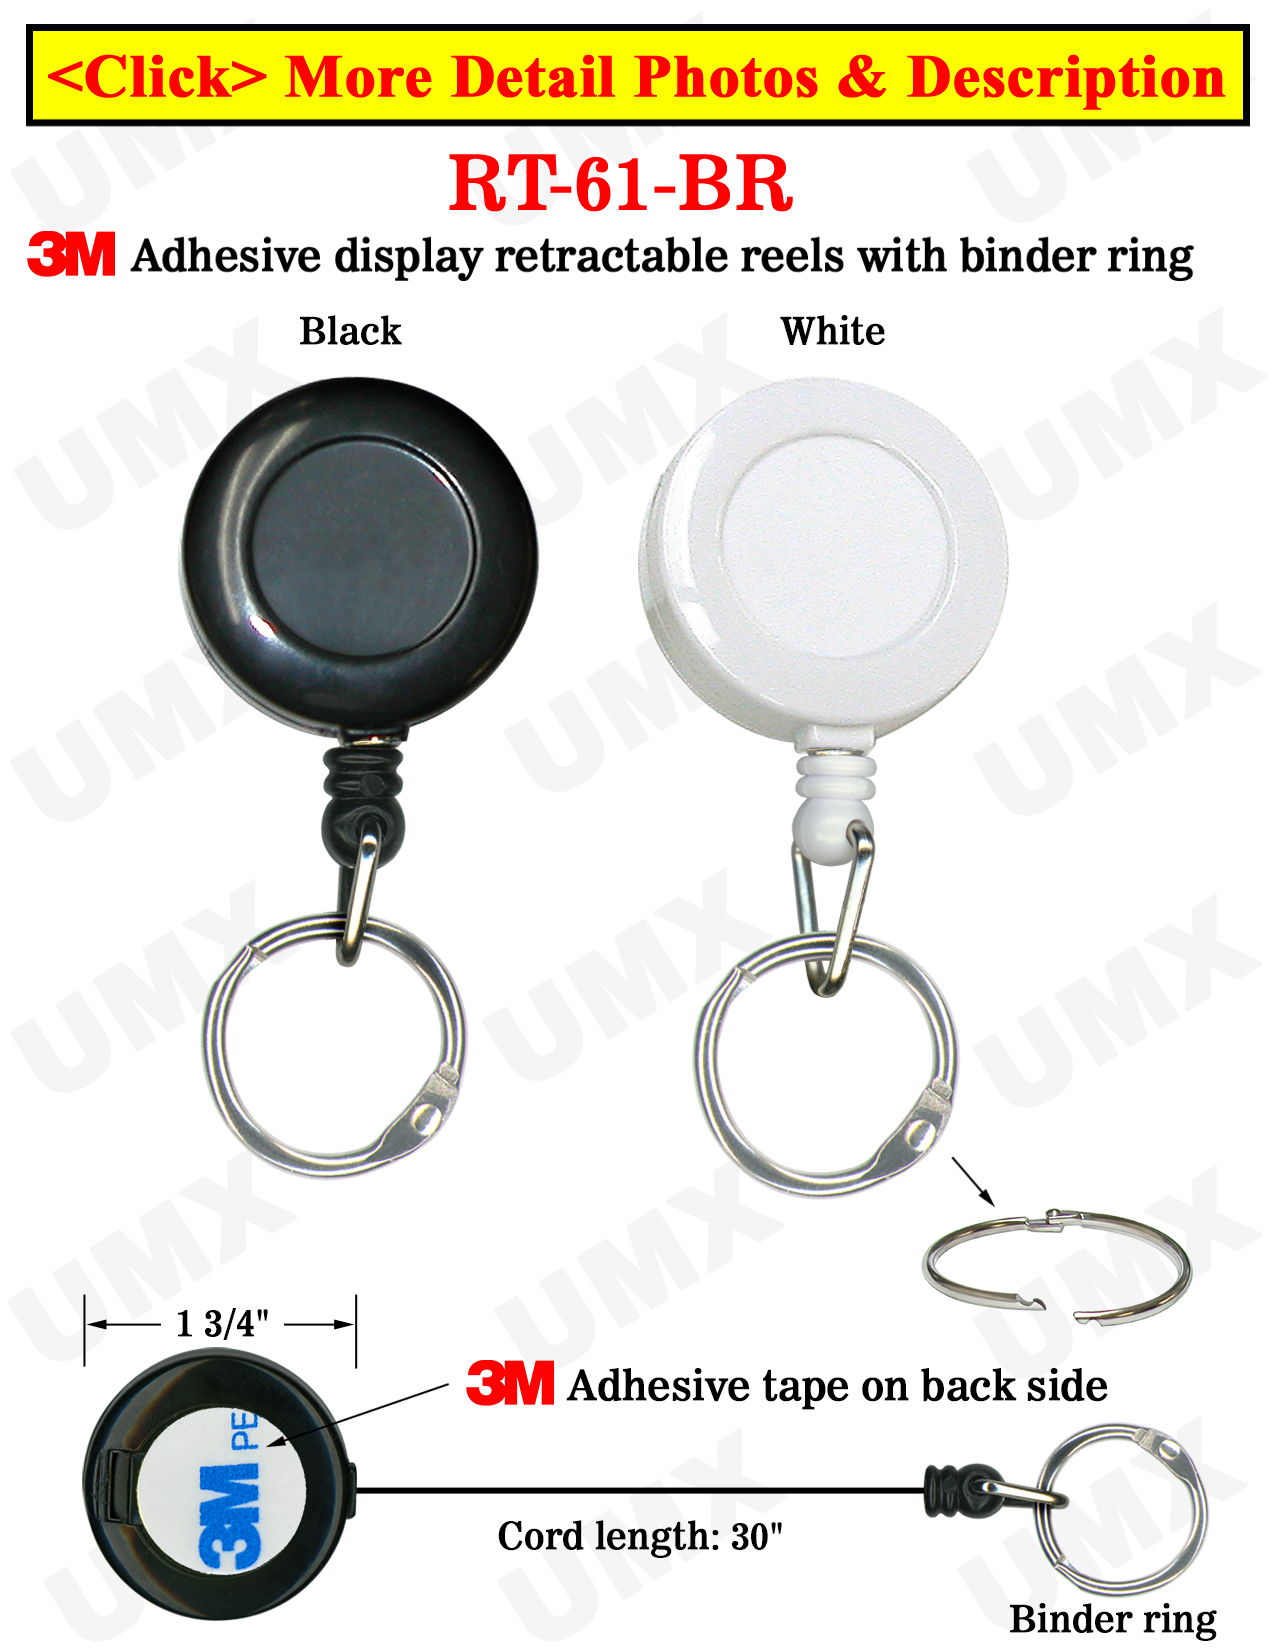 Low Cost Product Display Retractable Product Display Reels With